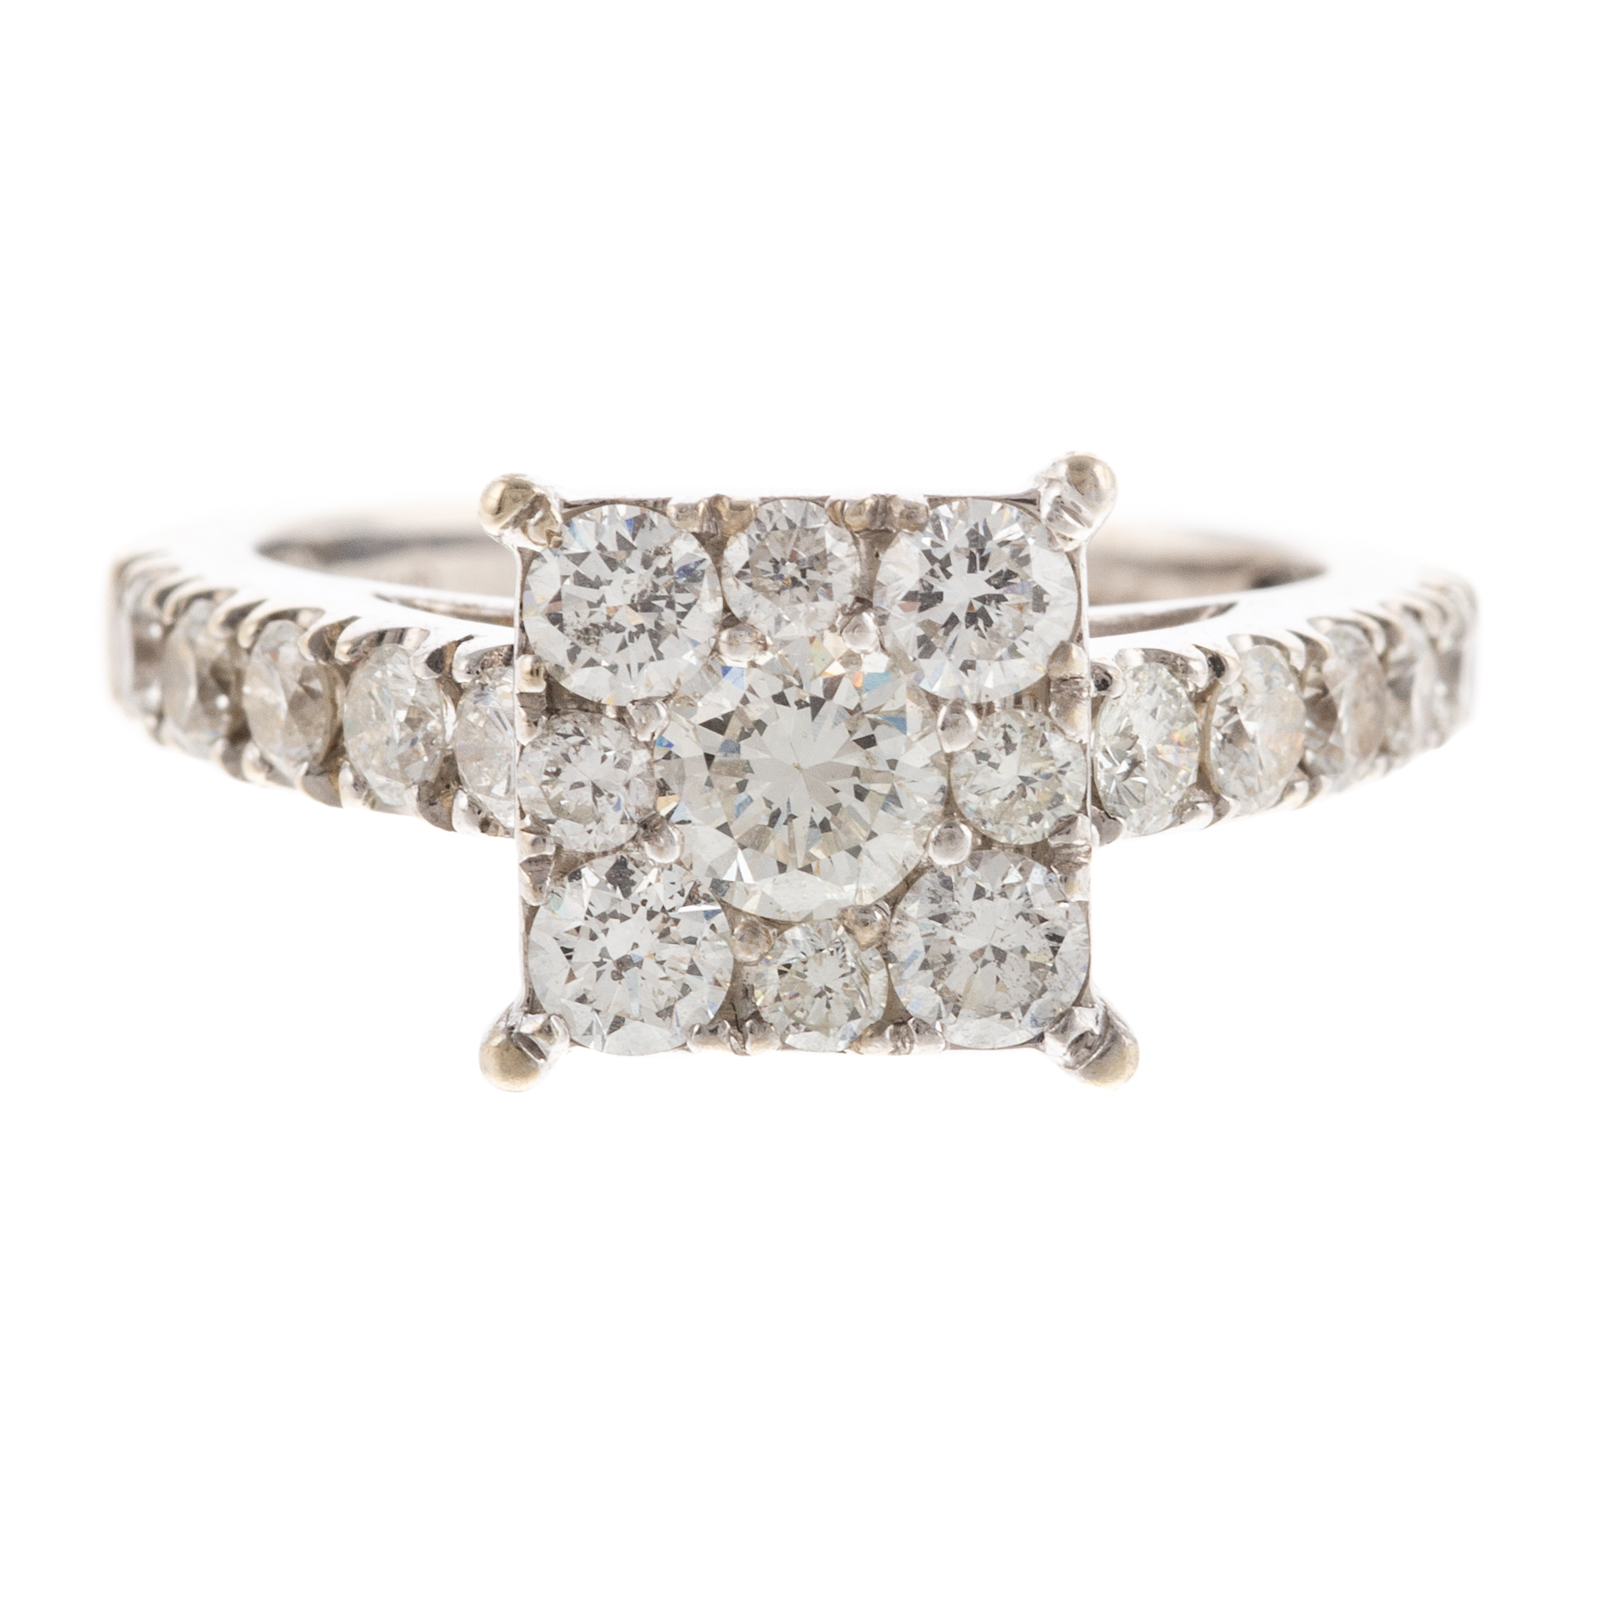 A SQUARE TOP DIAMOND CLUSTER RING